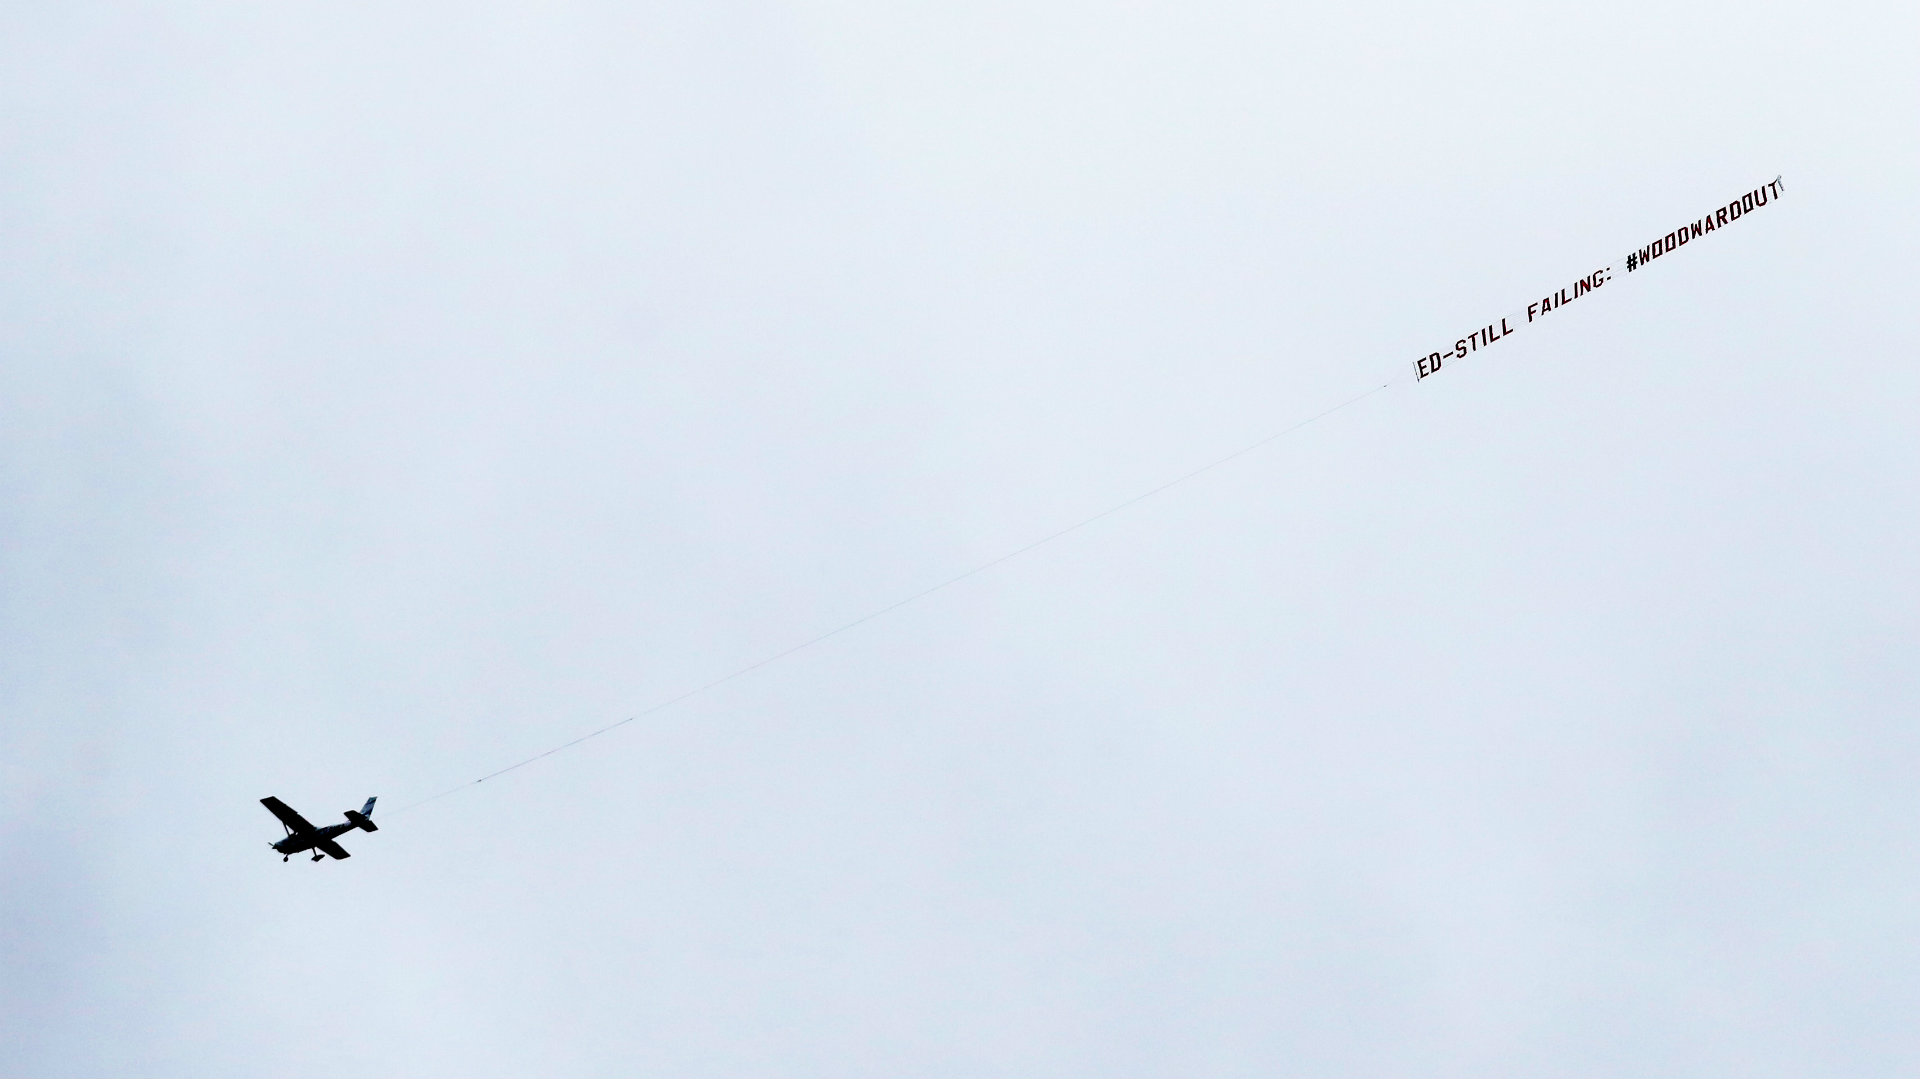 Man Utd fans in Ed Woodward plane protest ahead of Liverpool game